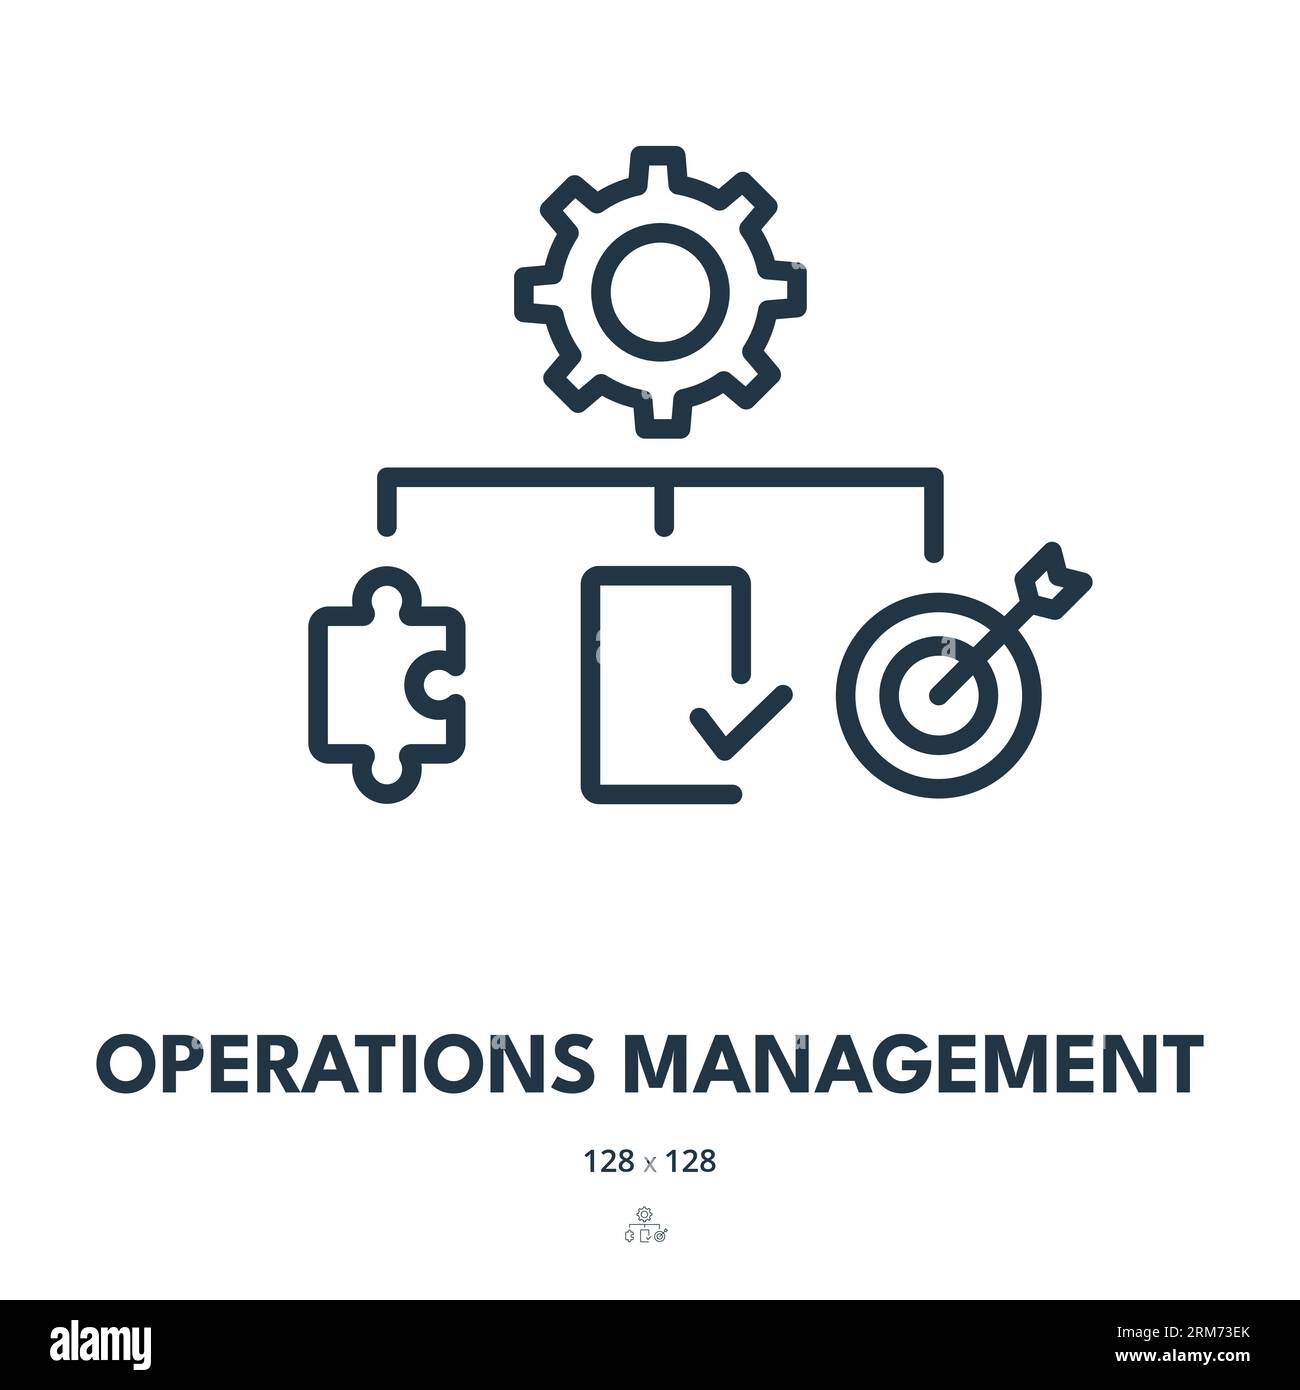 Operations Management Icon. Process, Control, Implement. Editable Stroke. Simple Vector Icon Stock Vector